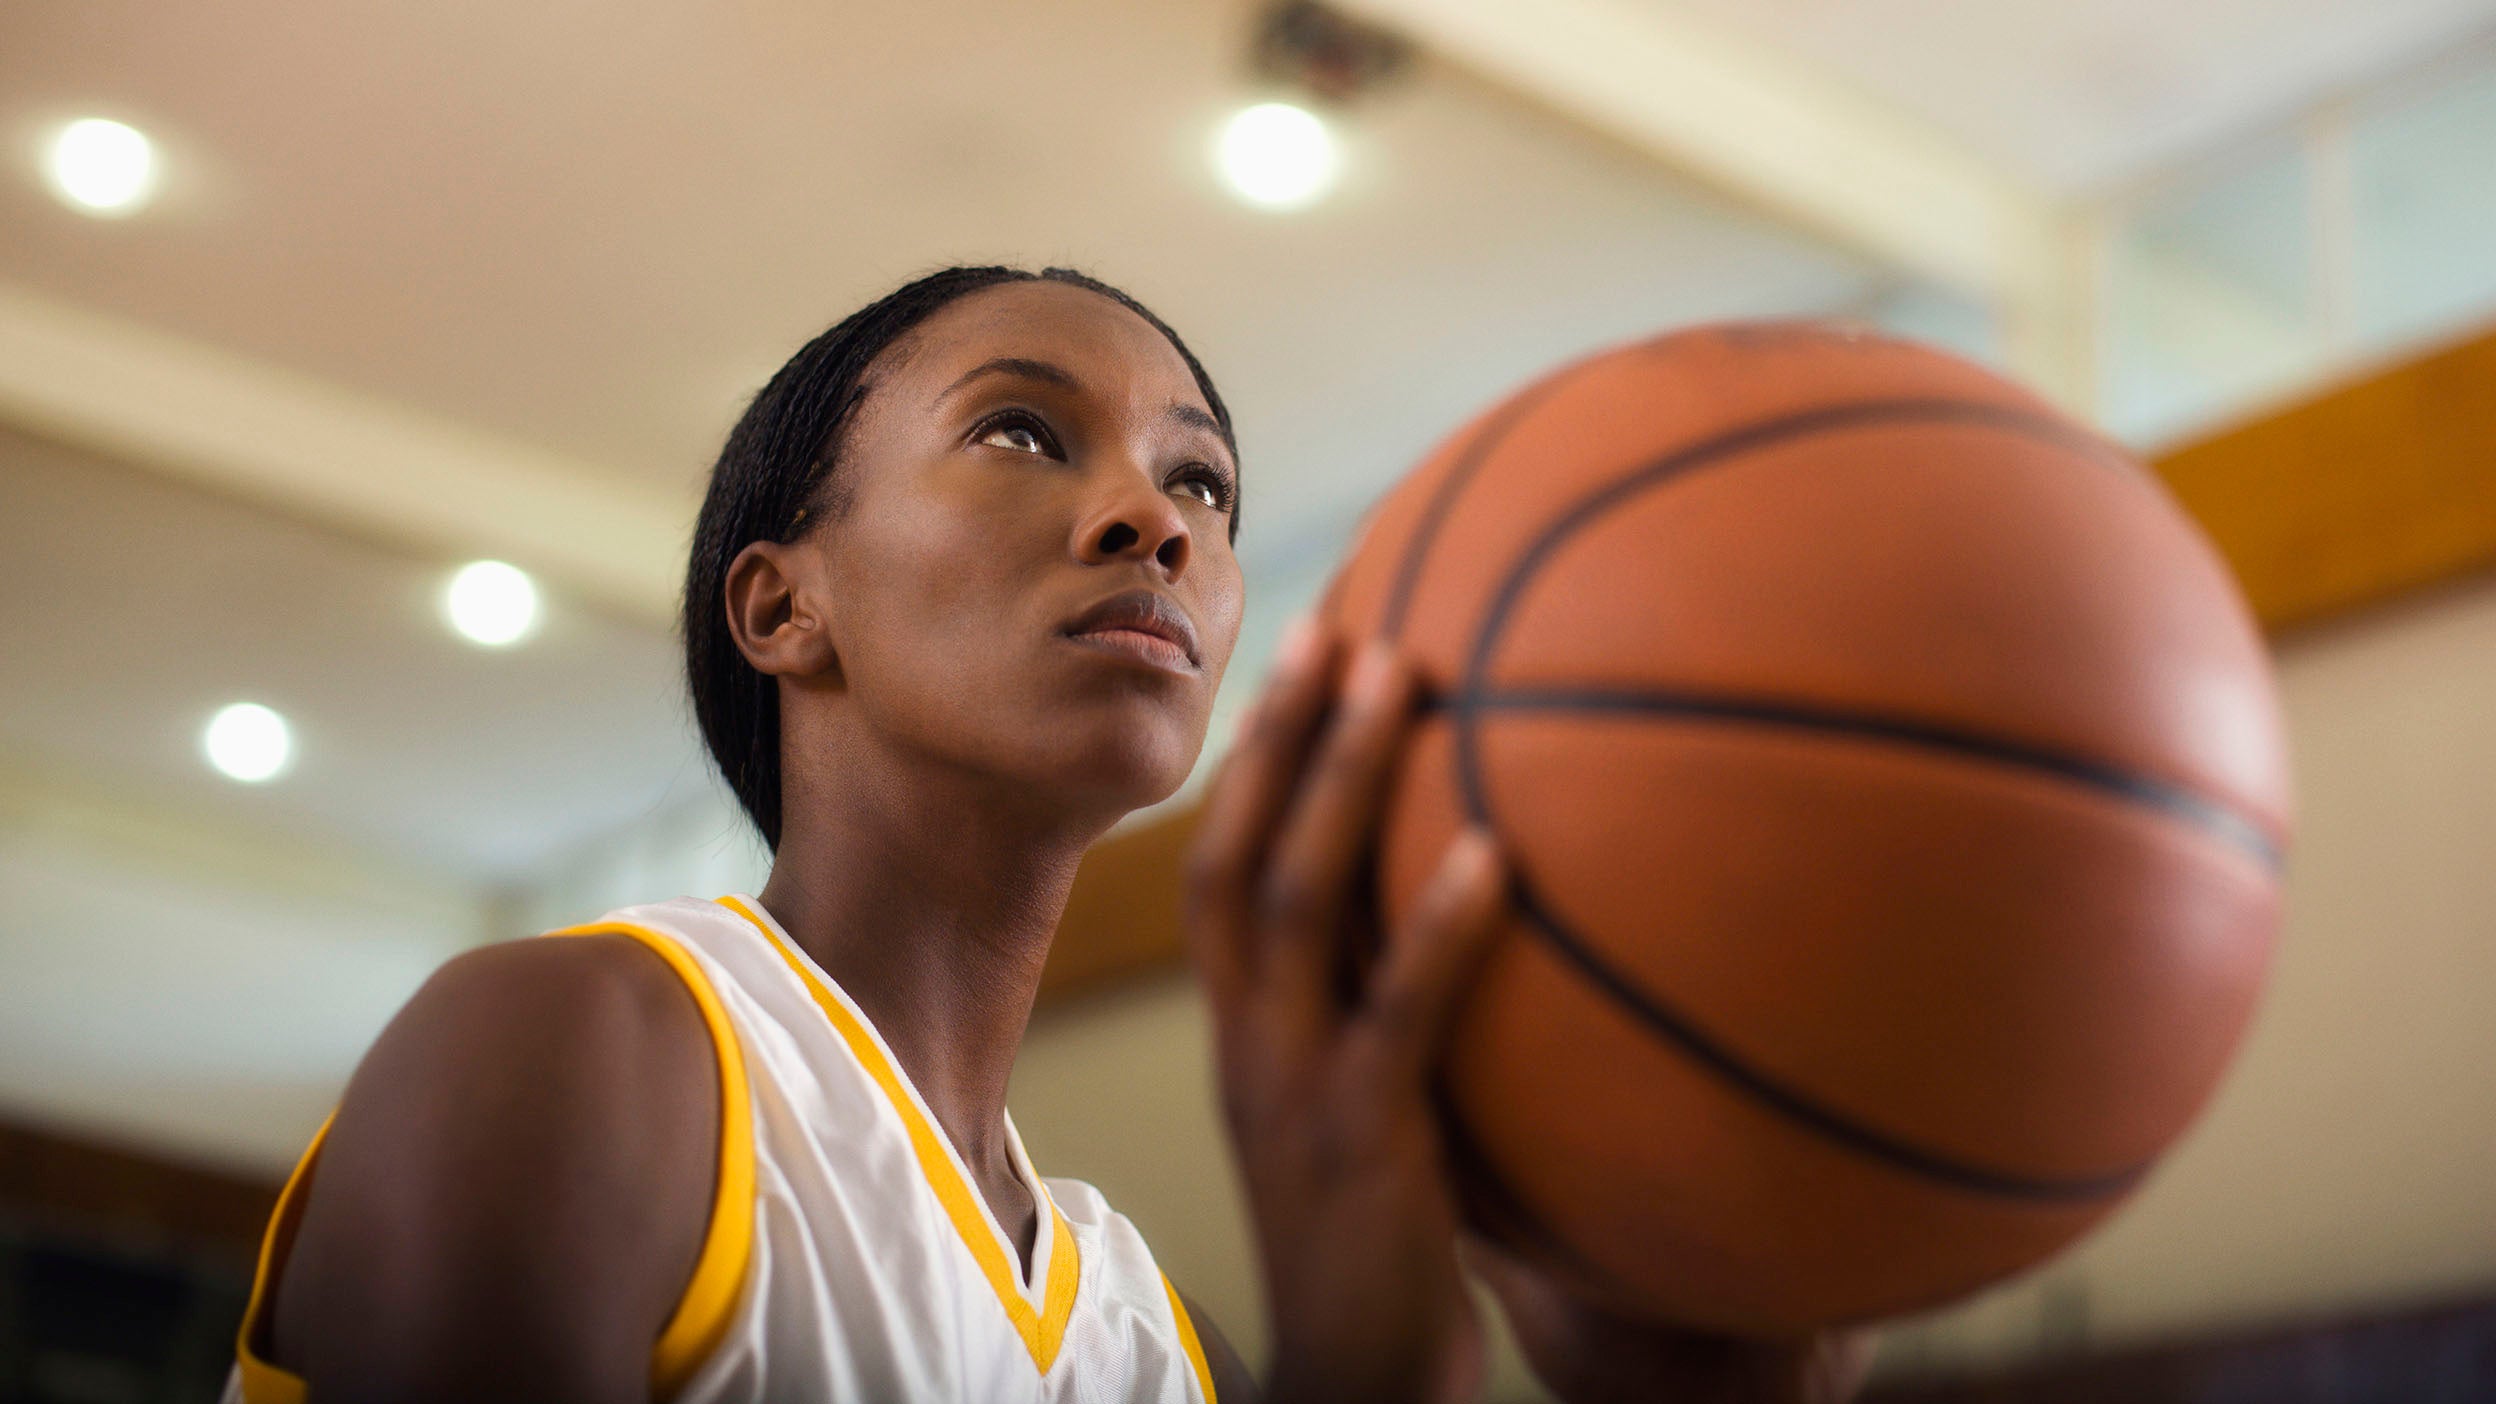 Woman basketball player about to take a shot in an indoor court.